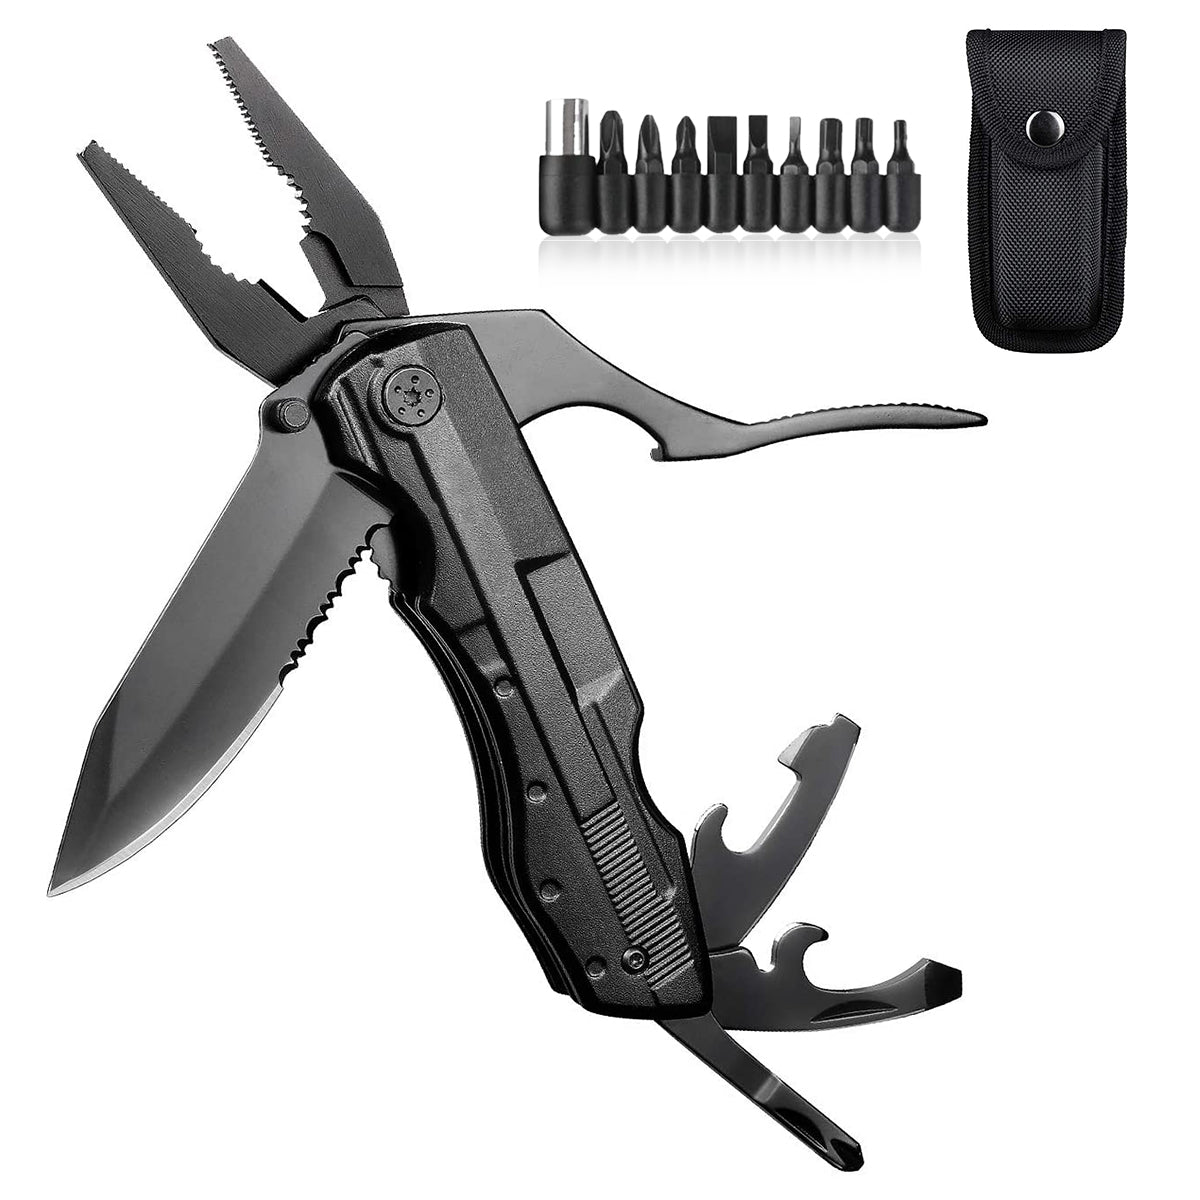 Proberos  Foldable Multi Tools Kit Plier with Nylon Pouch for Great Men's Camping, Cycling , DIY Activities 9 in 1